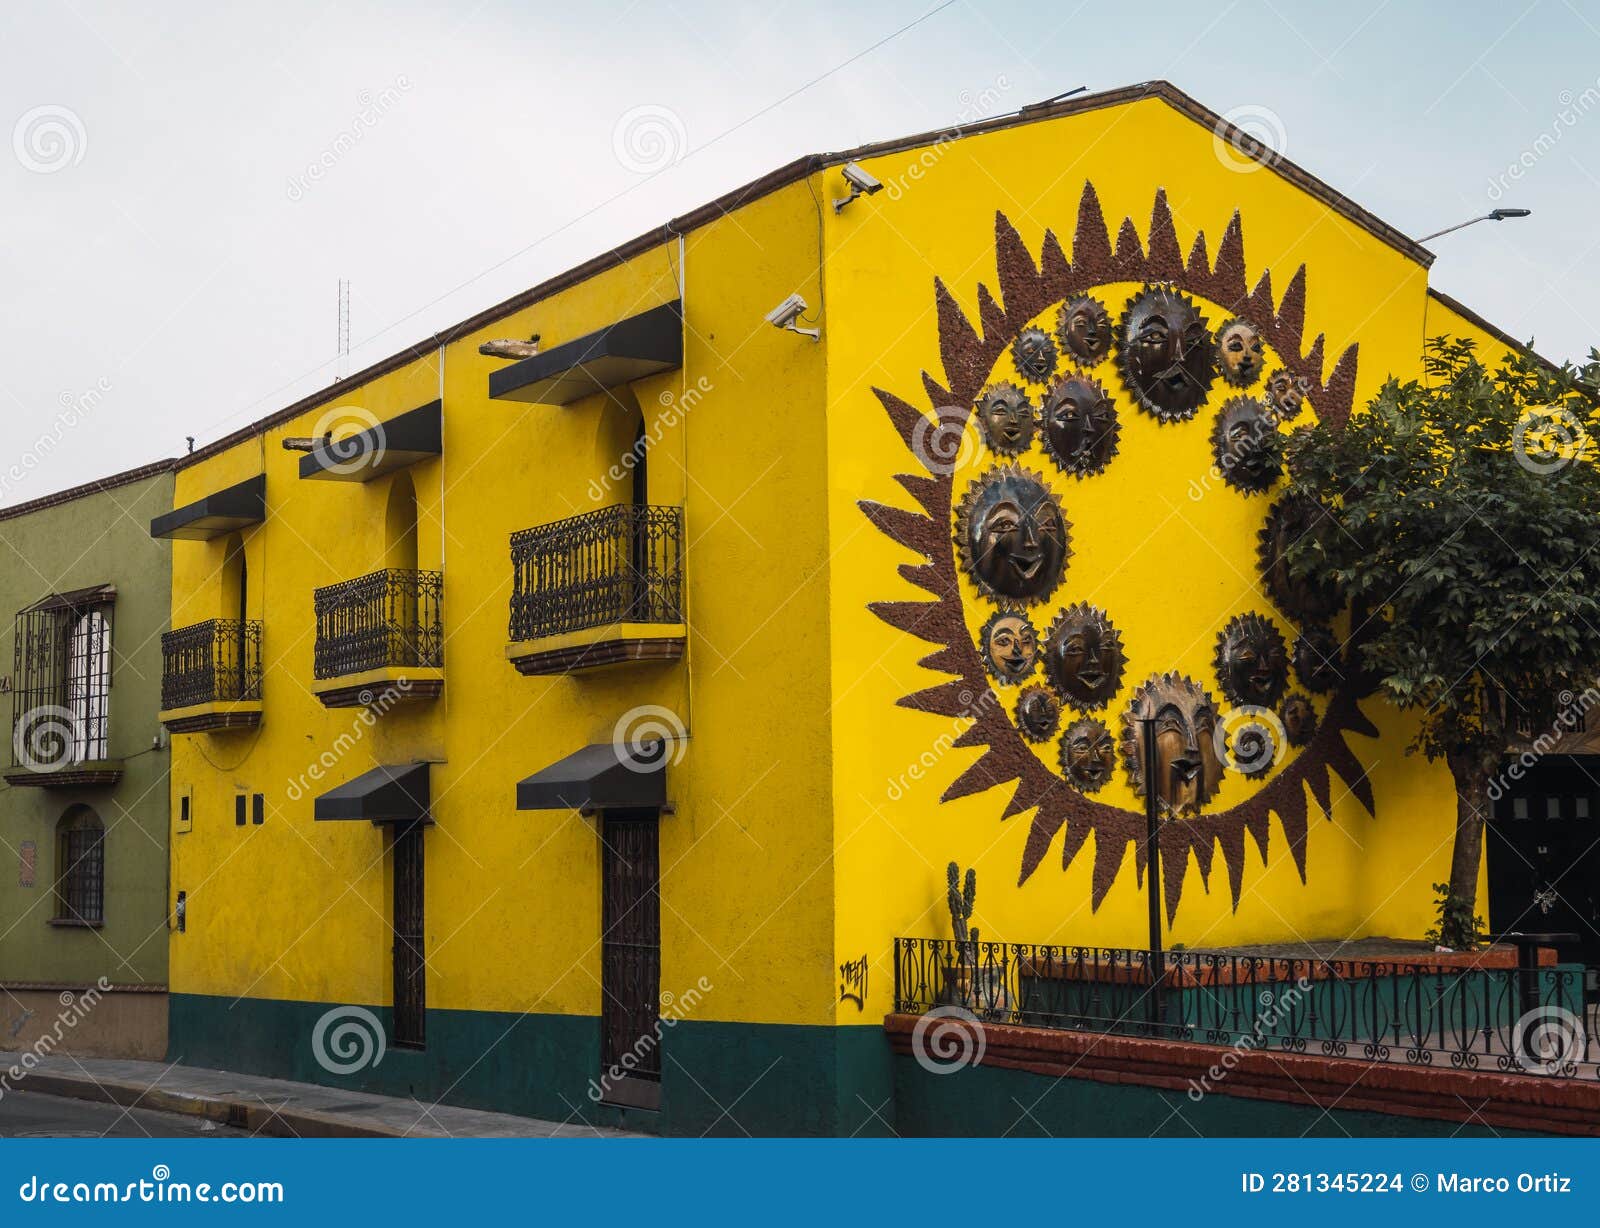 famous old house in the center of metepec, state of mexico, with clay soles that characterize it